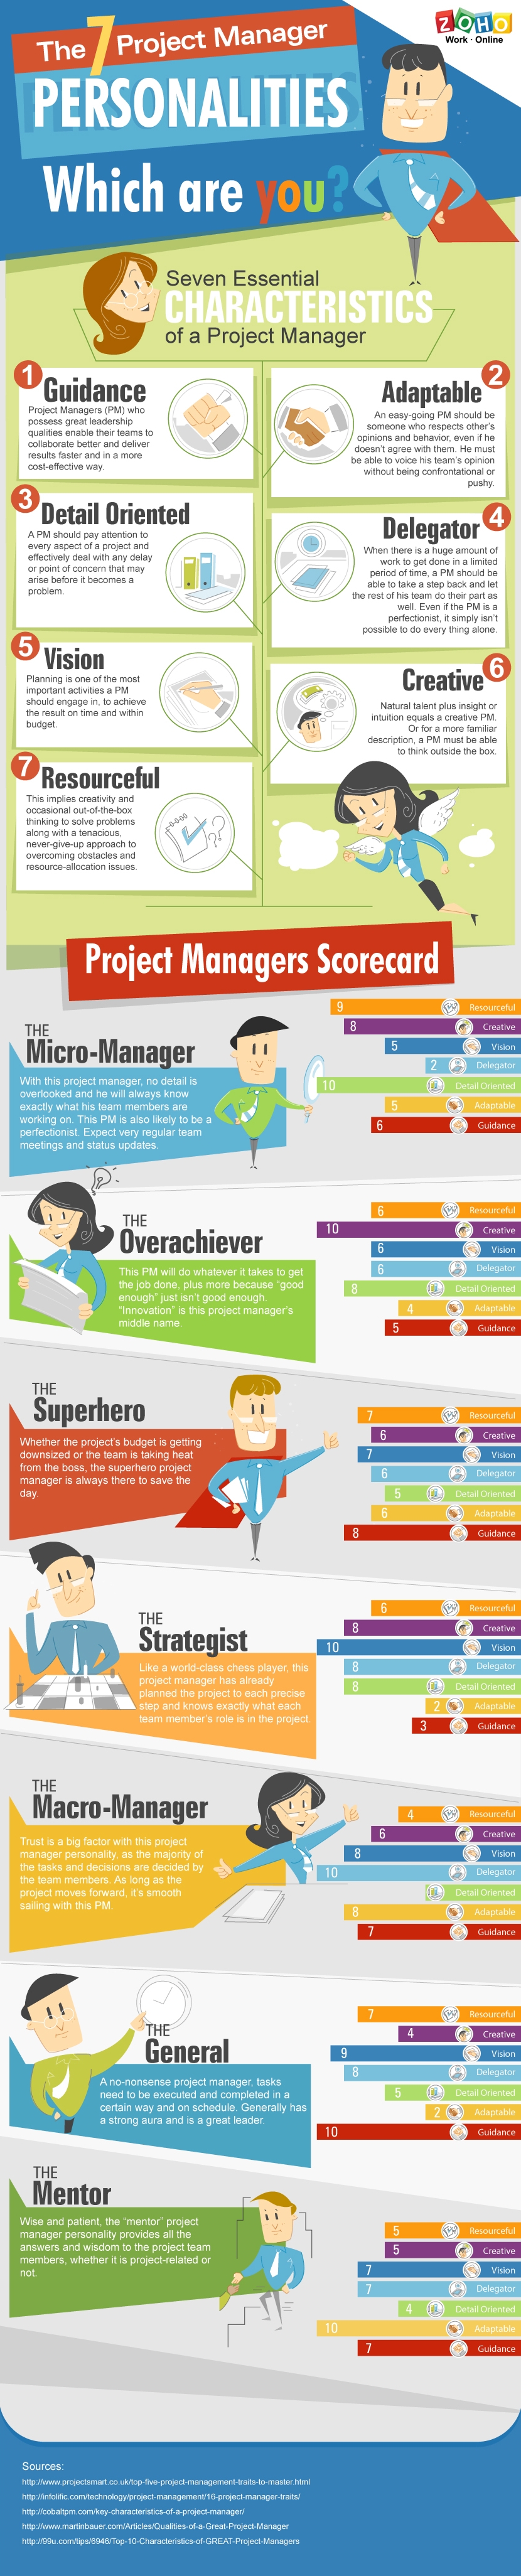 The 7 Project Manager Personalities: Which One Are You?